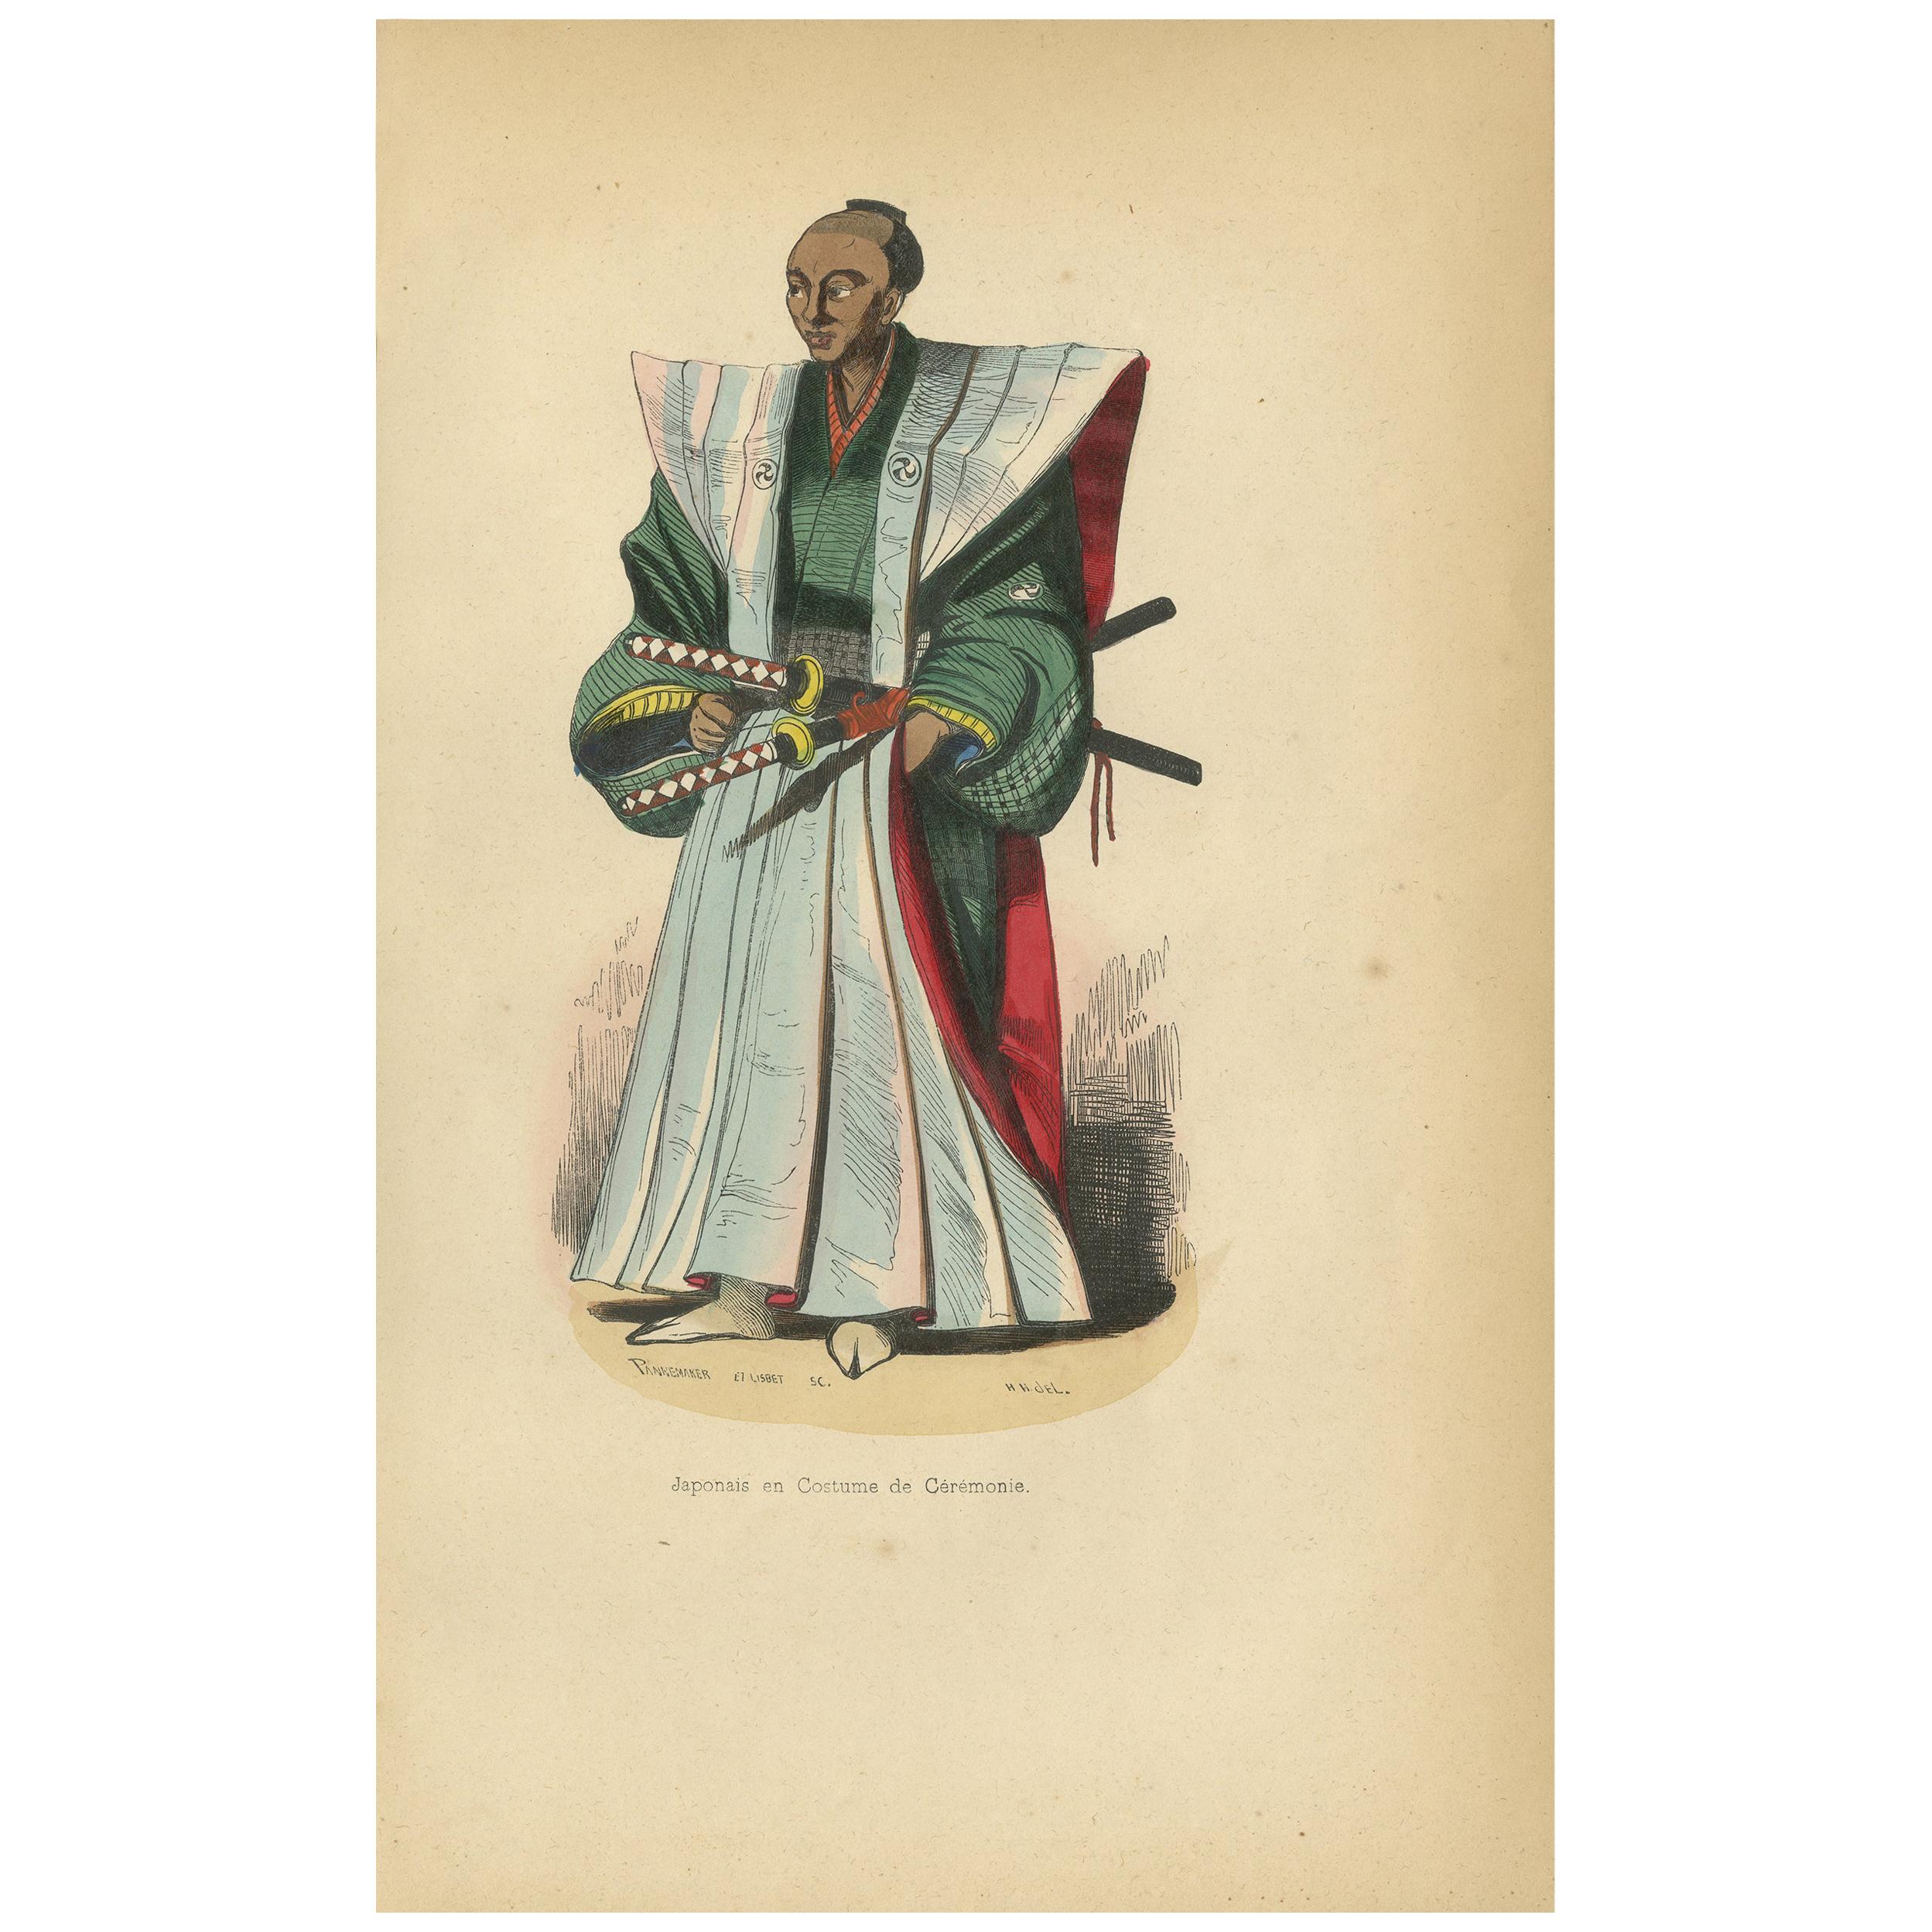 Antique Print of a Japanese Ceremonial Costume by Wahlen, 1843